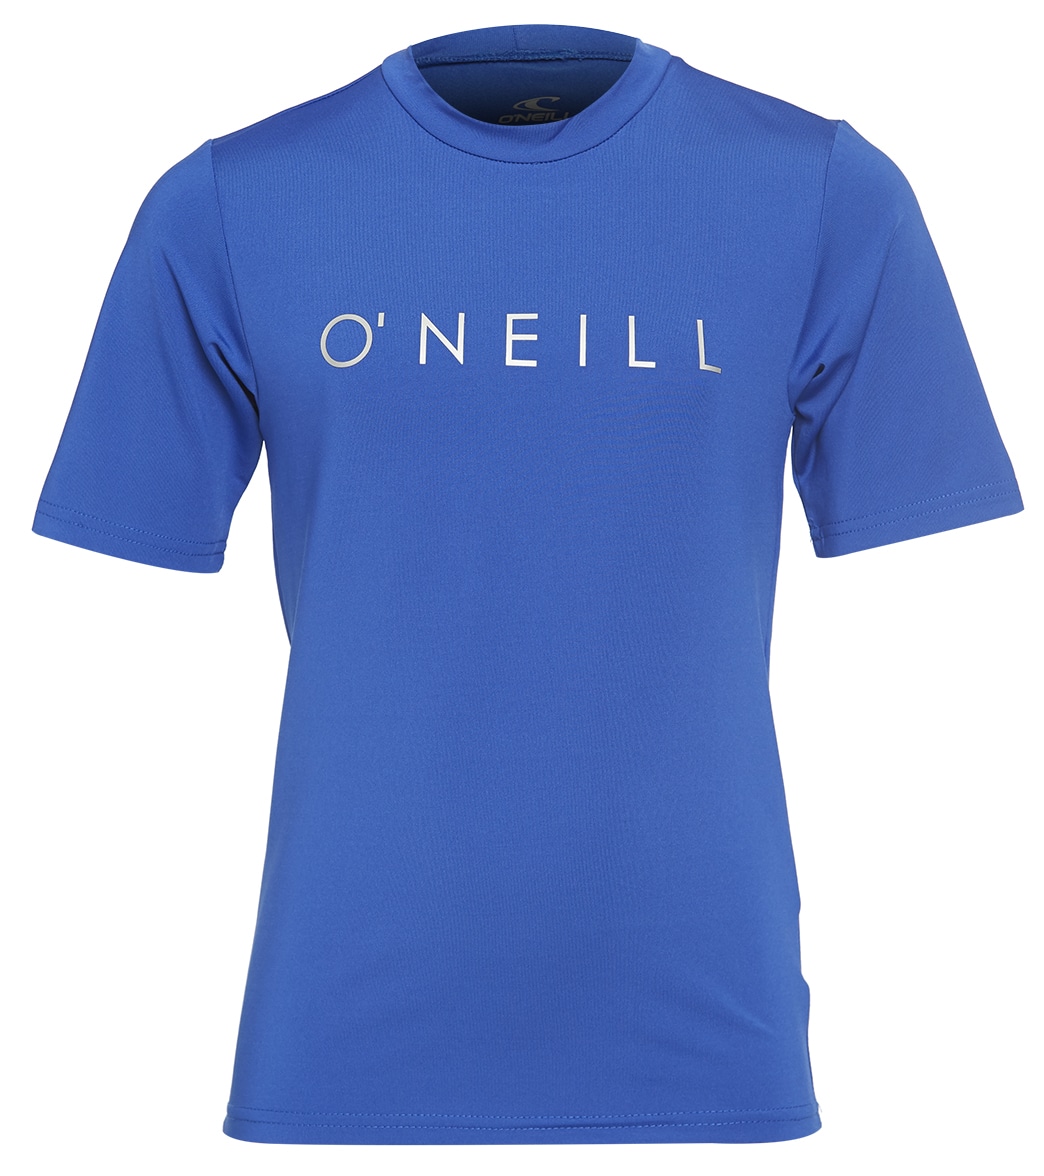 O'neill Youth Basic Upf 30+ Short Sleeve Sun Shirt - Pacific 16 Polyester - Swimoutlet.com